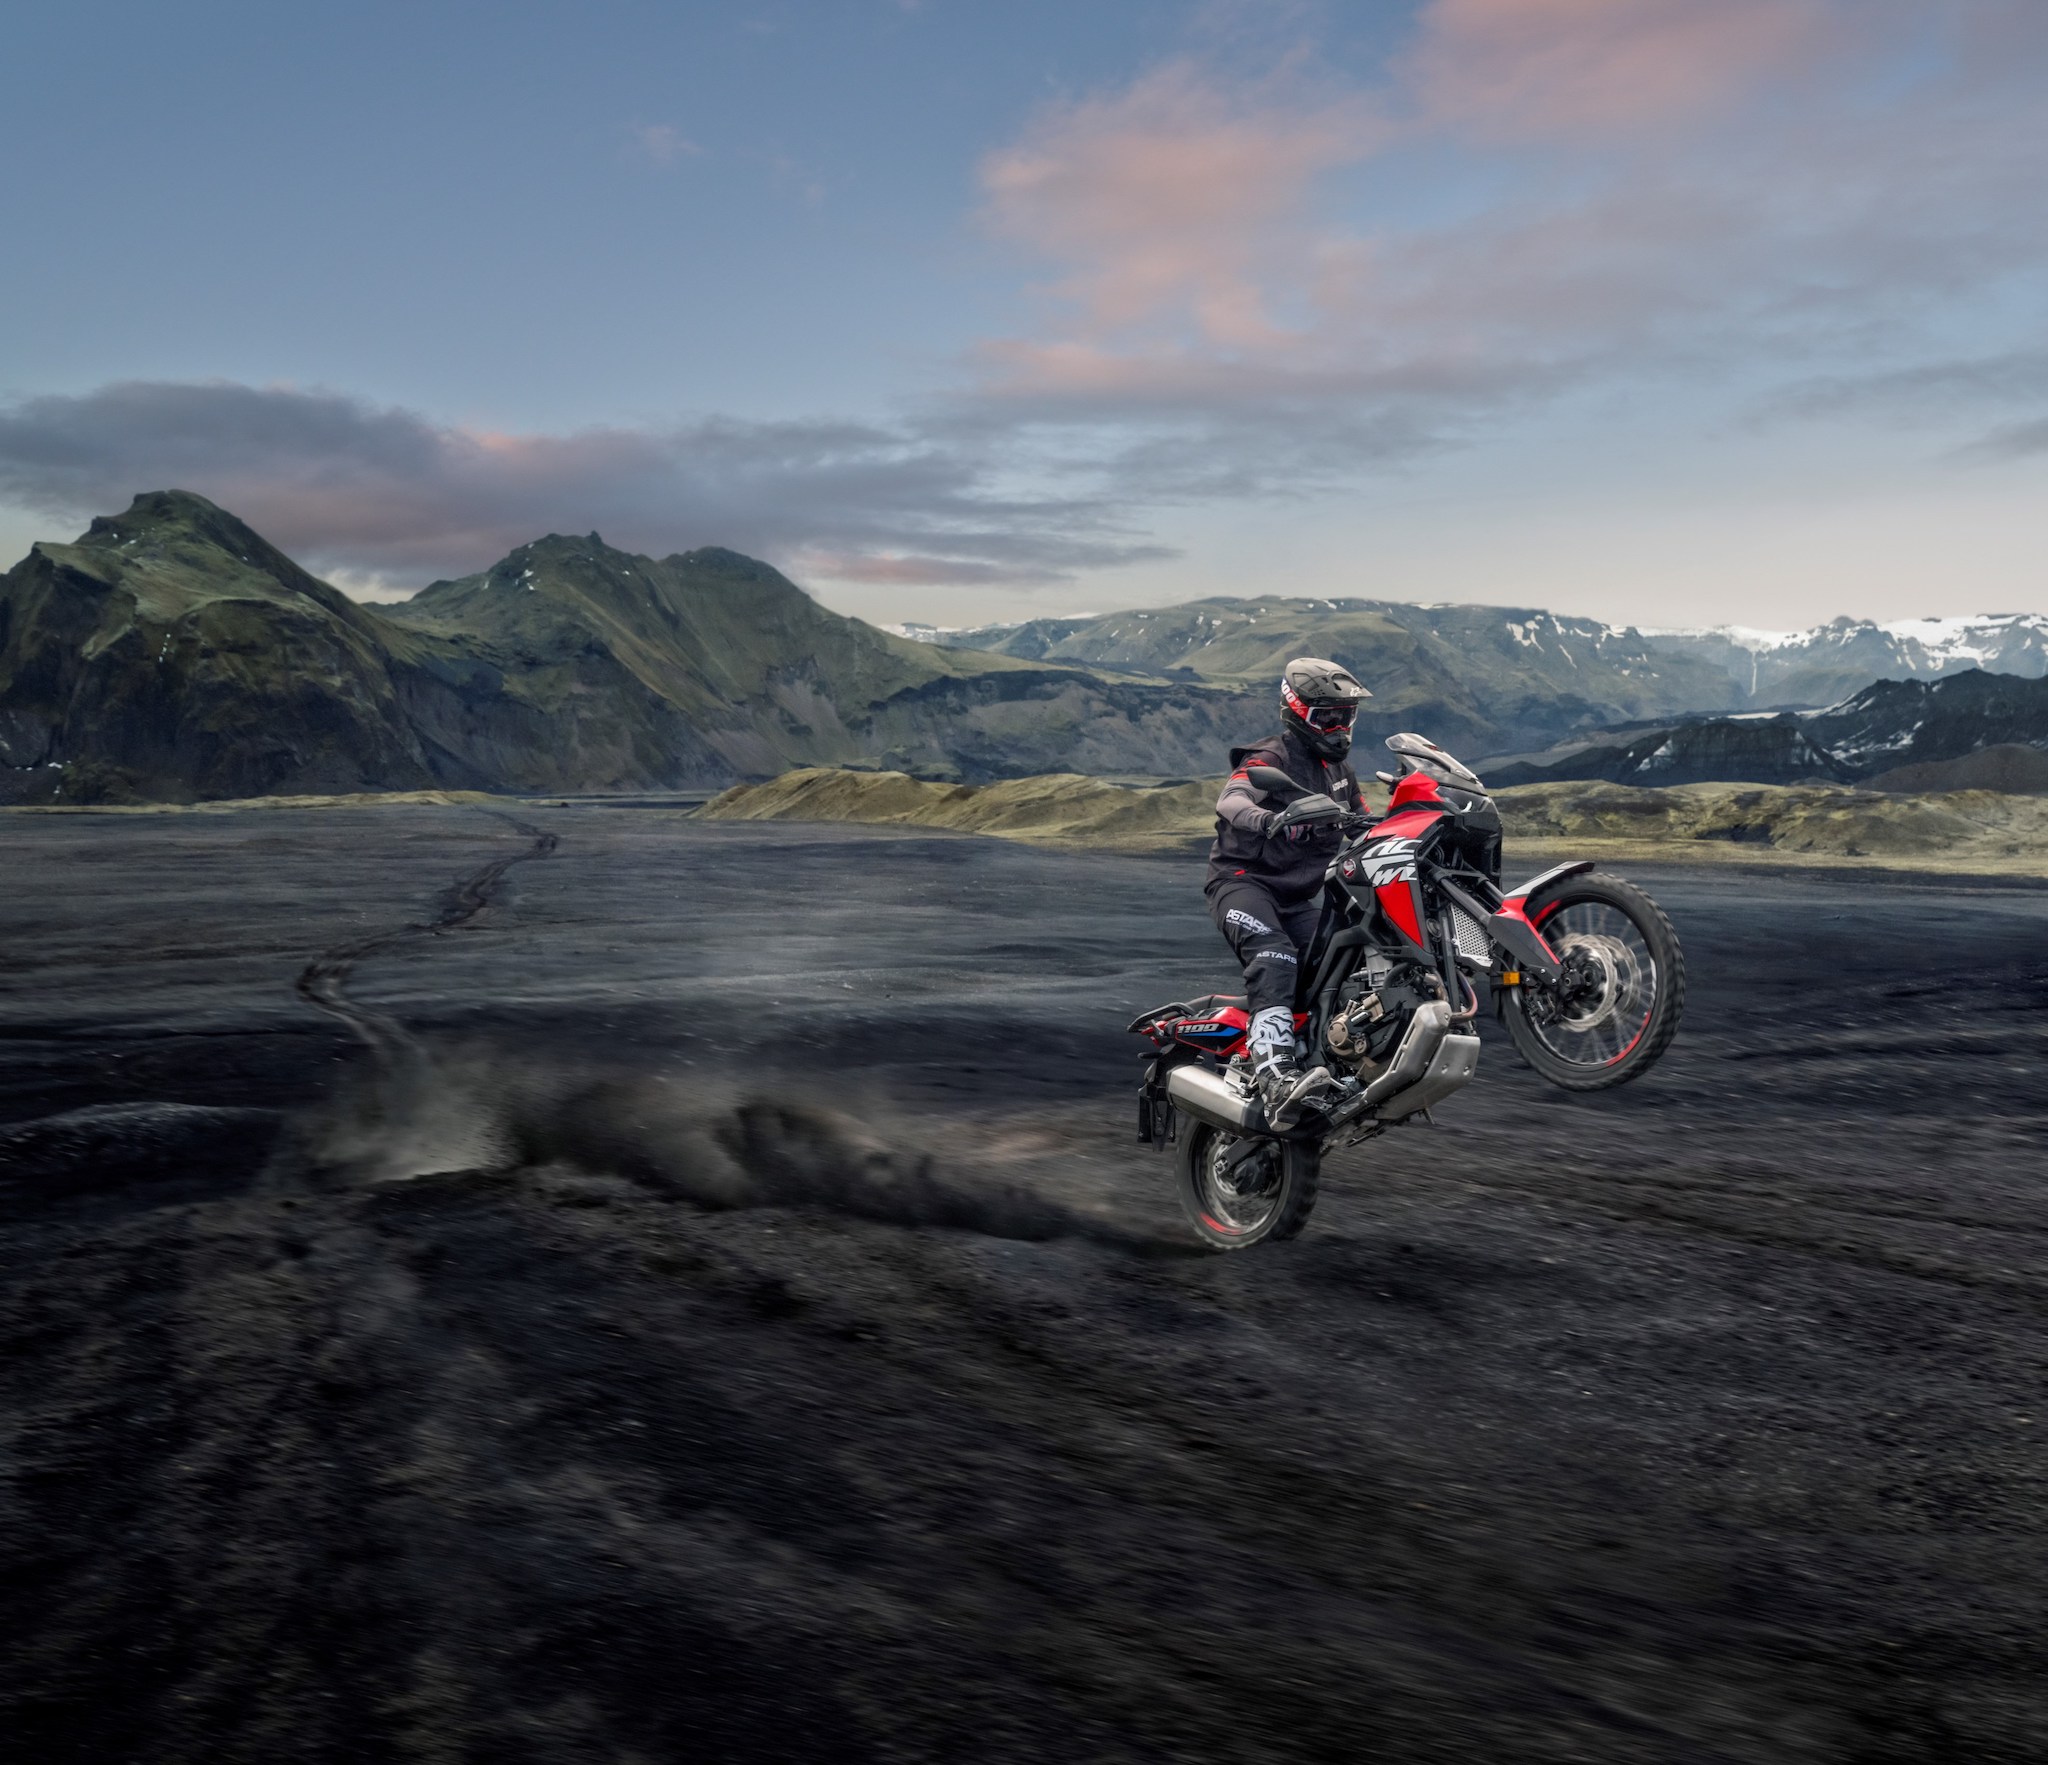 Africa Twin 2022